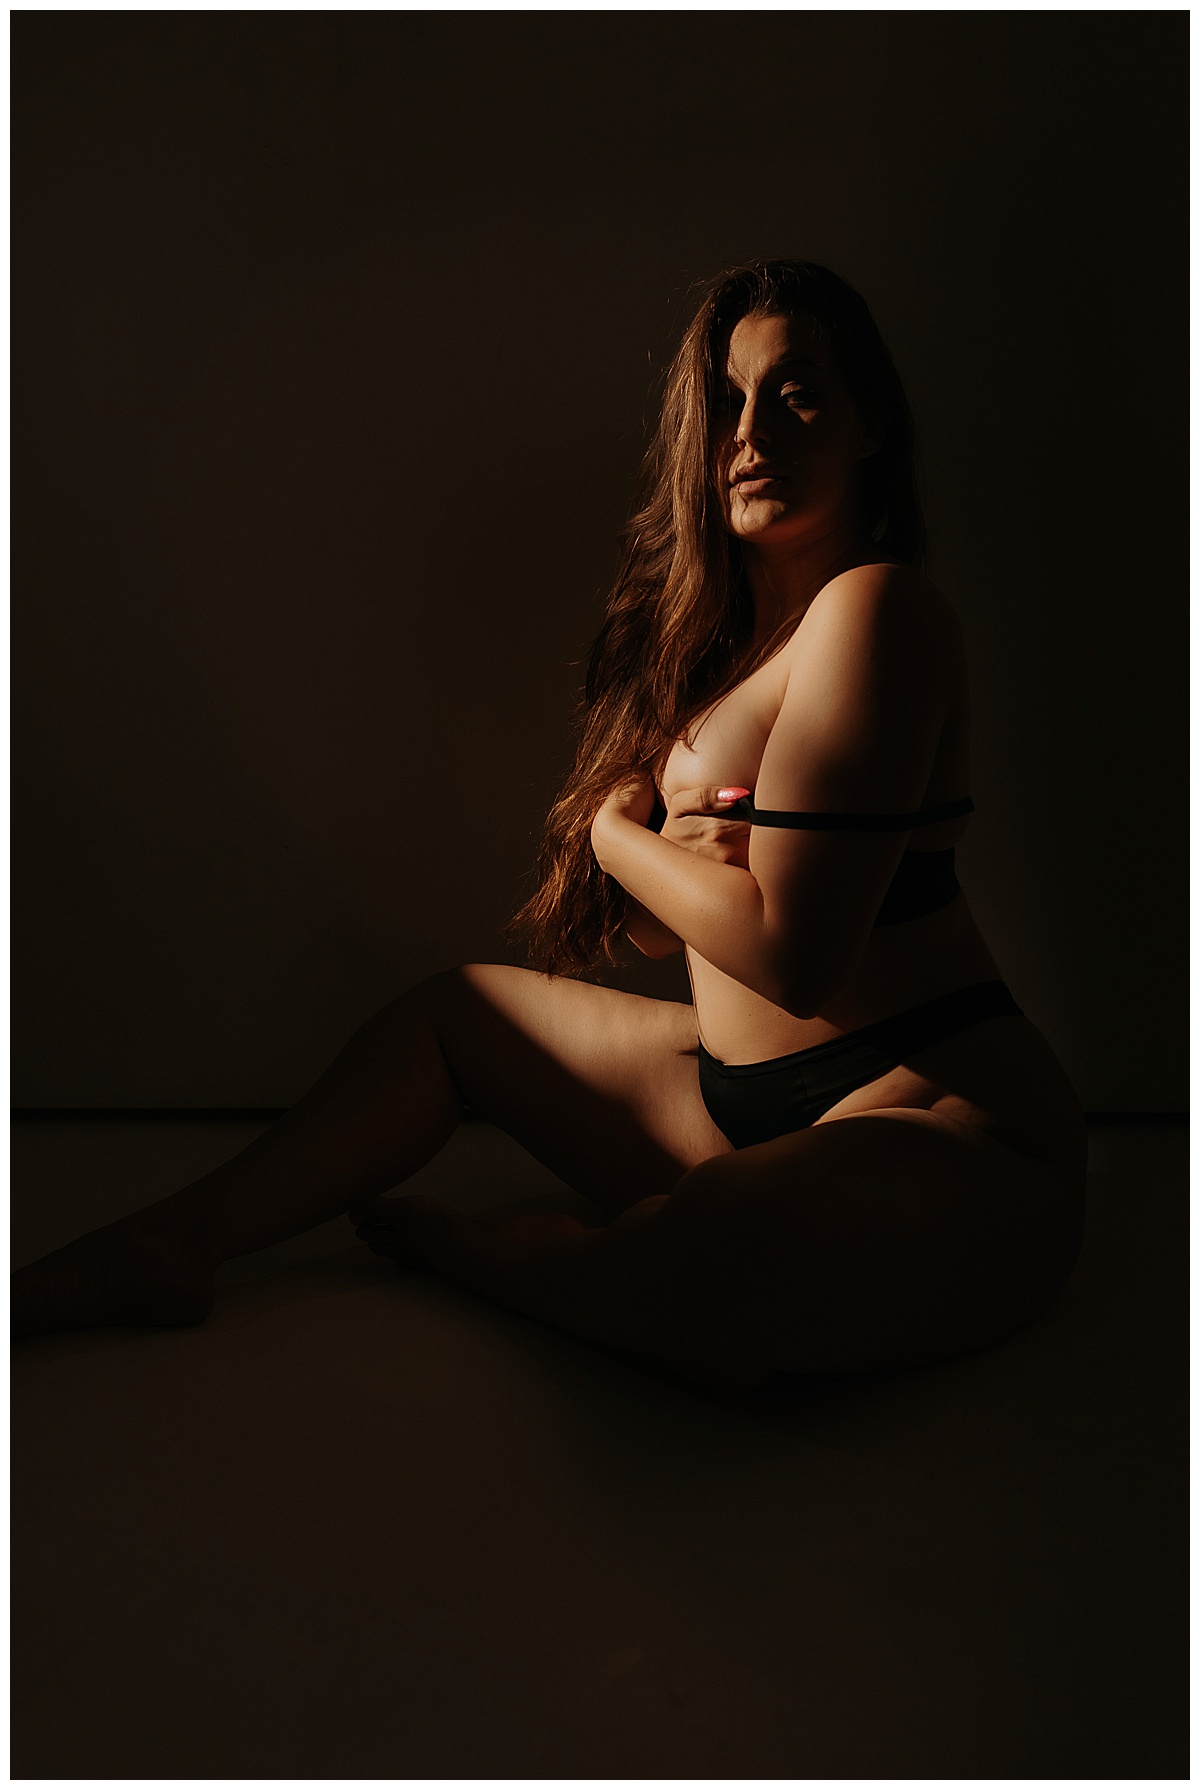 Lady covers chest with lingerie and hands using artificial light during boudoir session